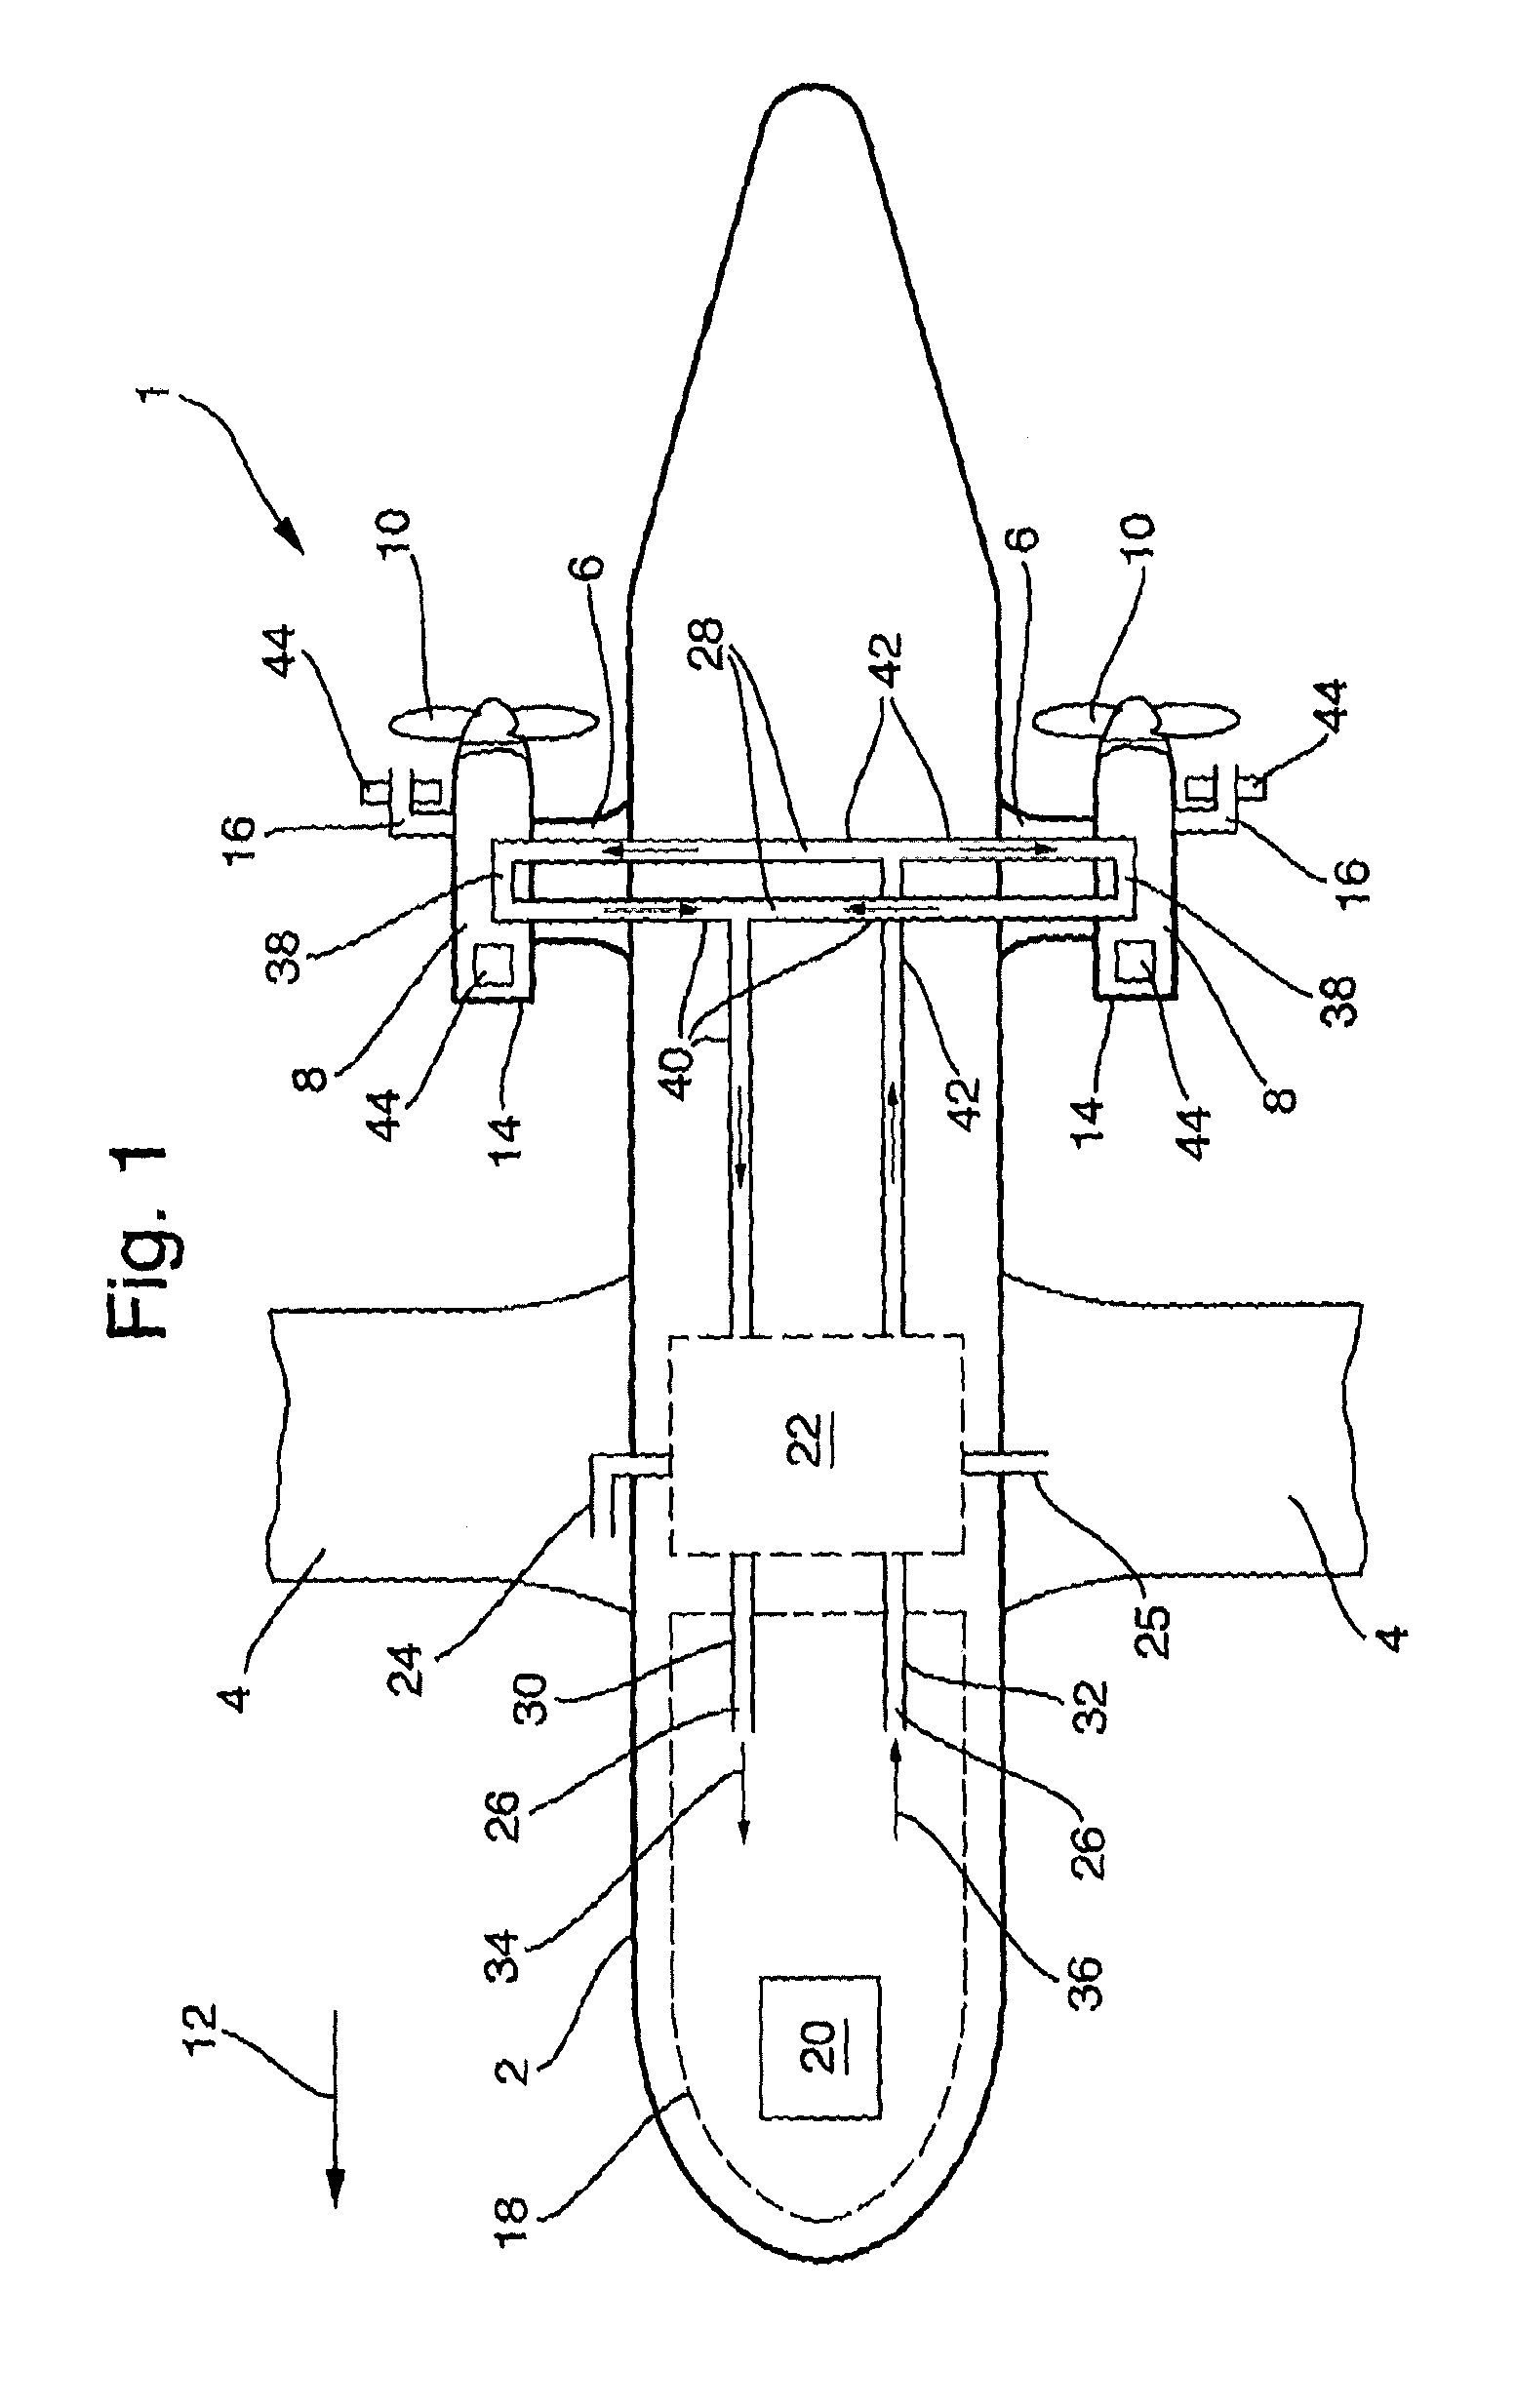 Turboprop-powered aircraft with thermal system